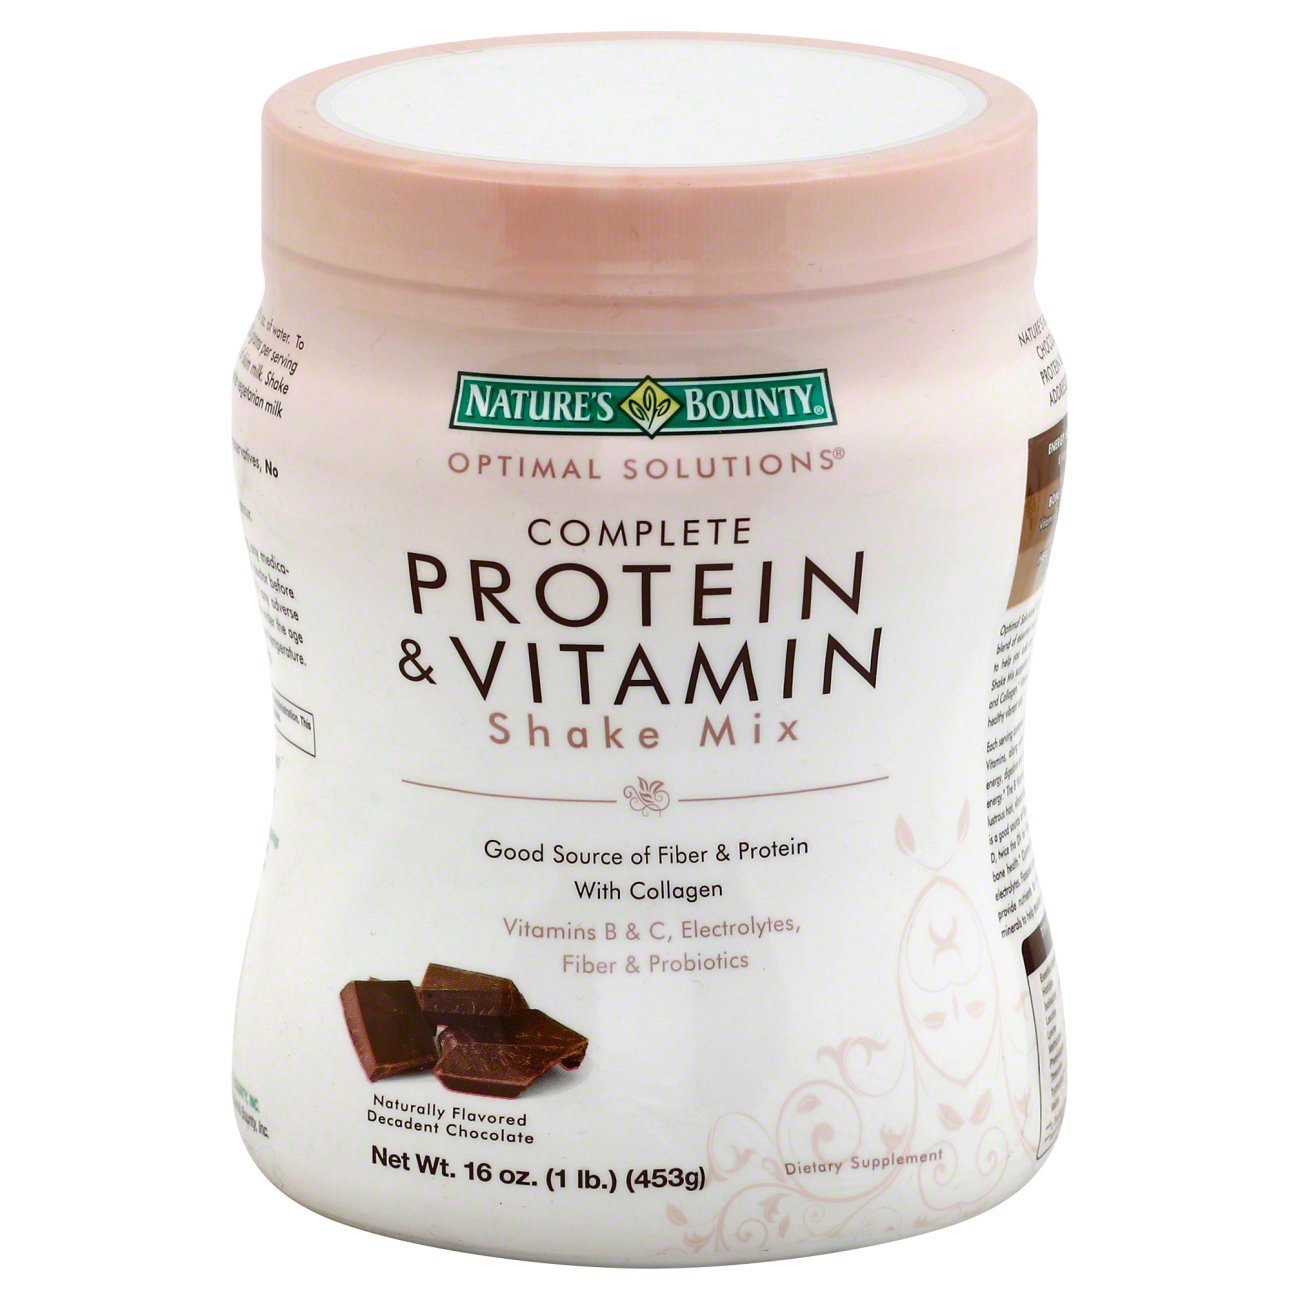  Complete Plant Protein & Vitamin Shake Mix by Nature's Bounty  Optimal Solutions, with Fiber and Probiotics, Plant Based, Decadent  Chocolate, 13 Oz : Health & Household